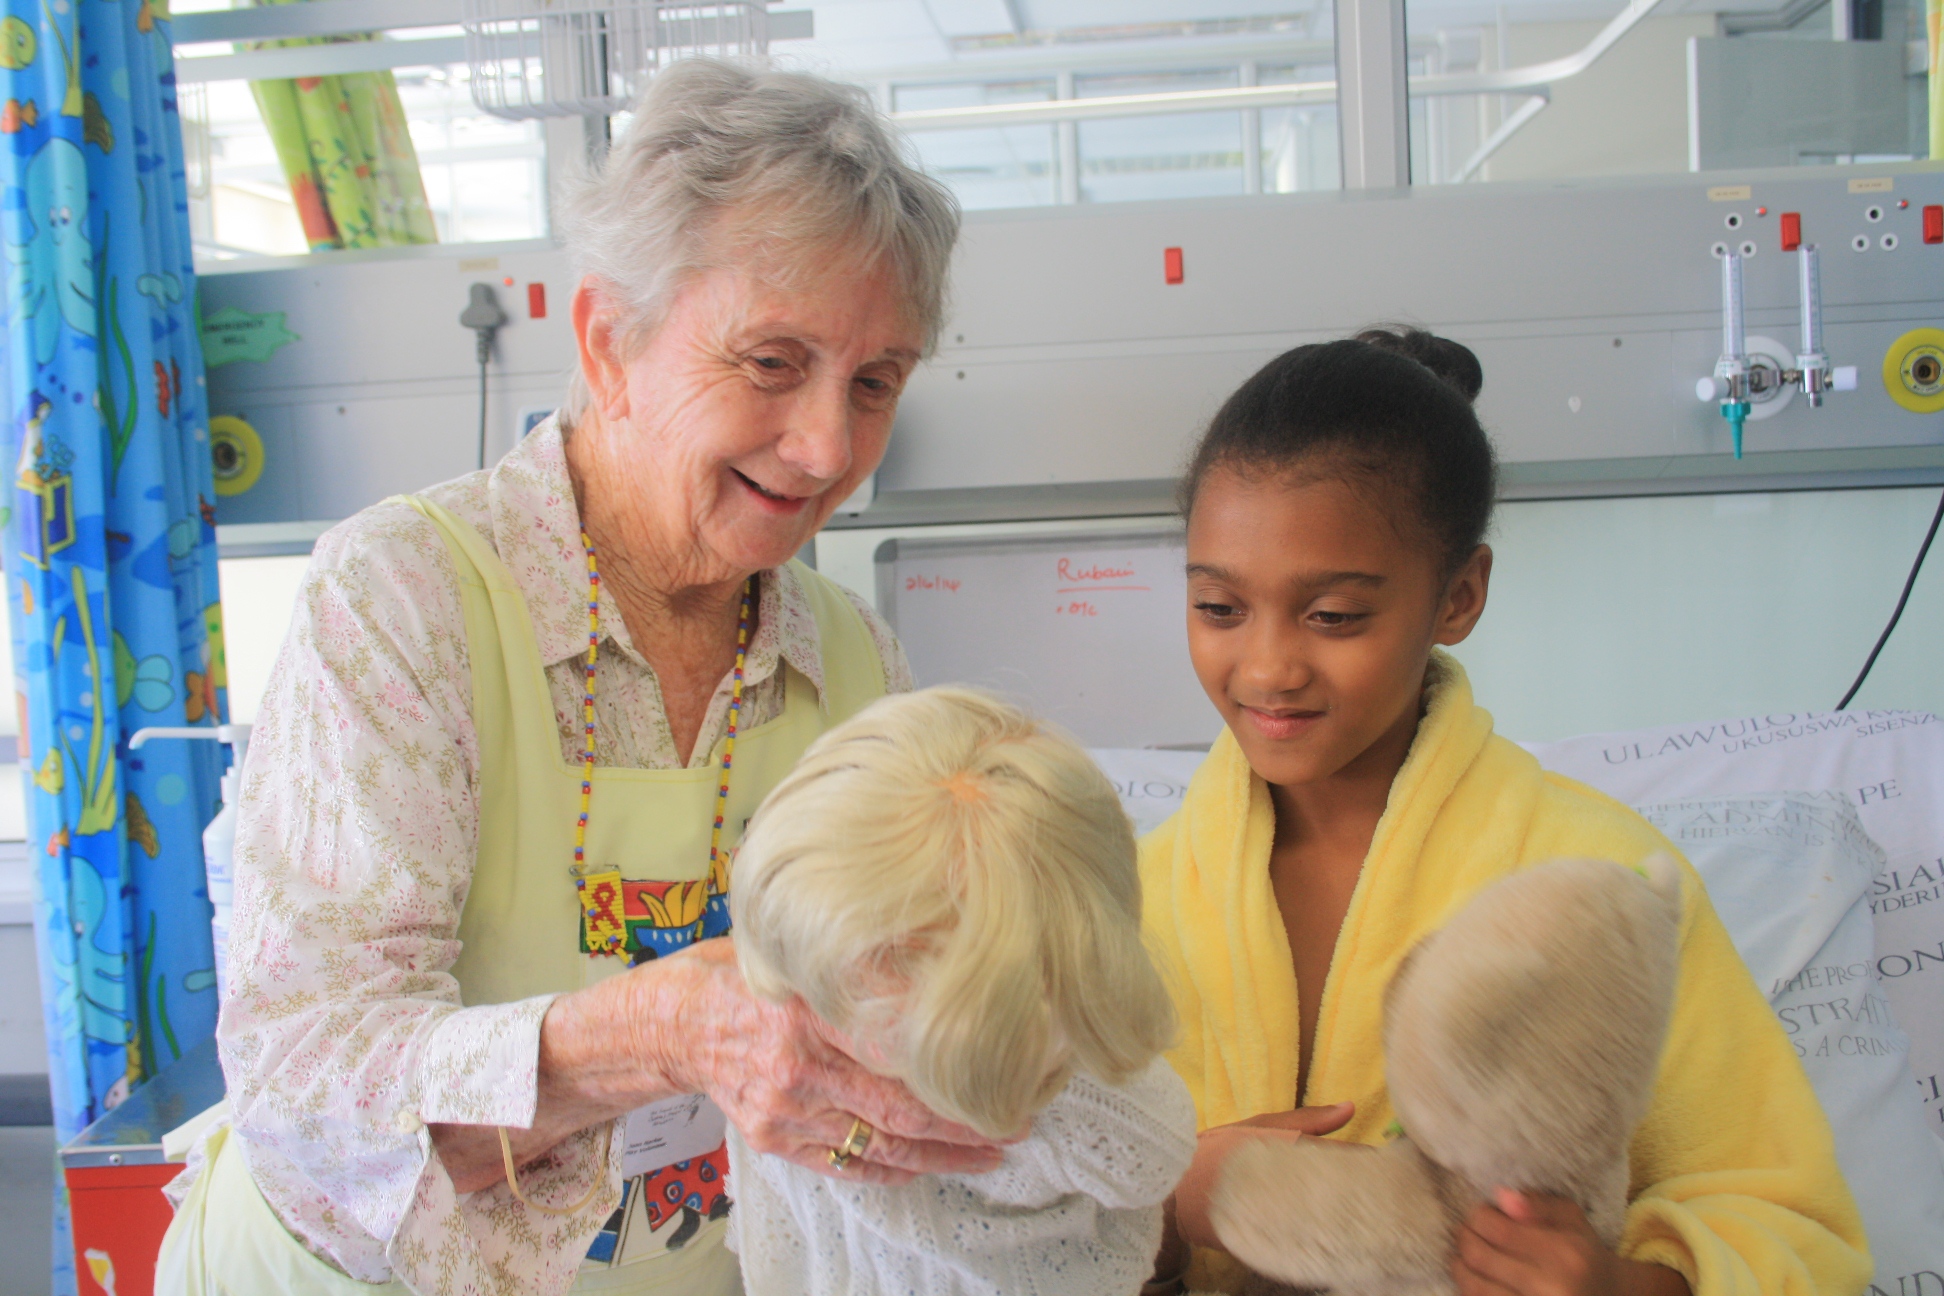 Jean Harker playing with Lisa Rubain (9) in the ward at Red Cross War Memorial Children’s Hospital.